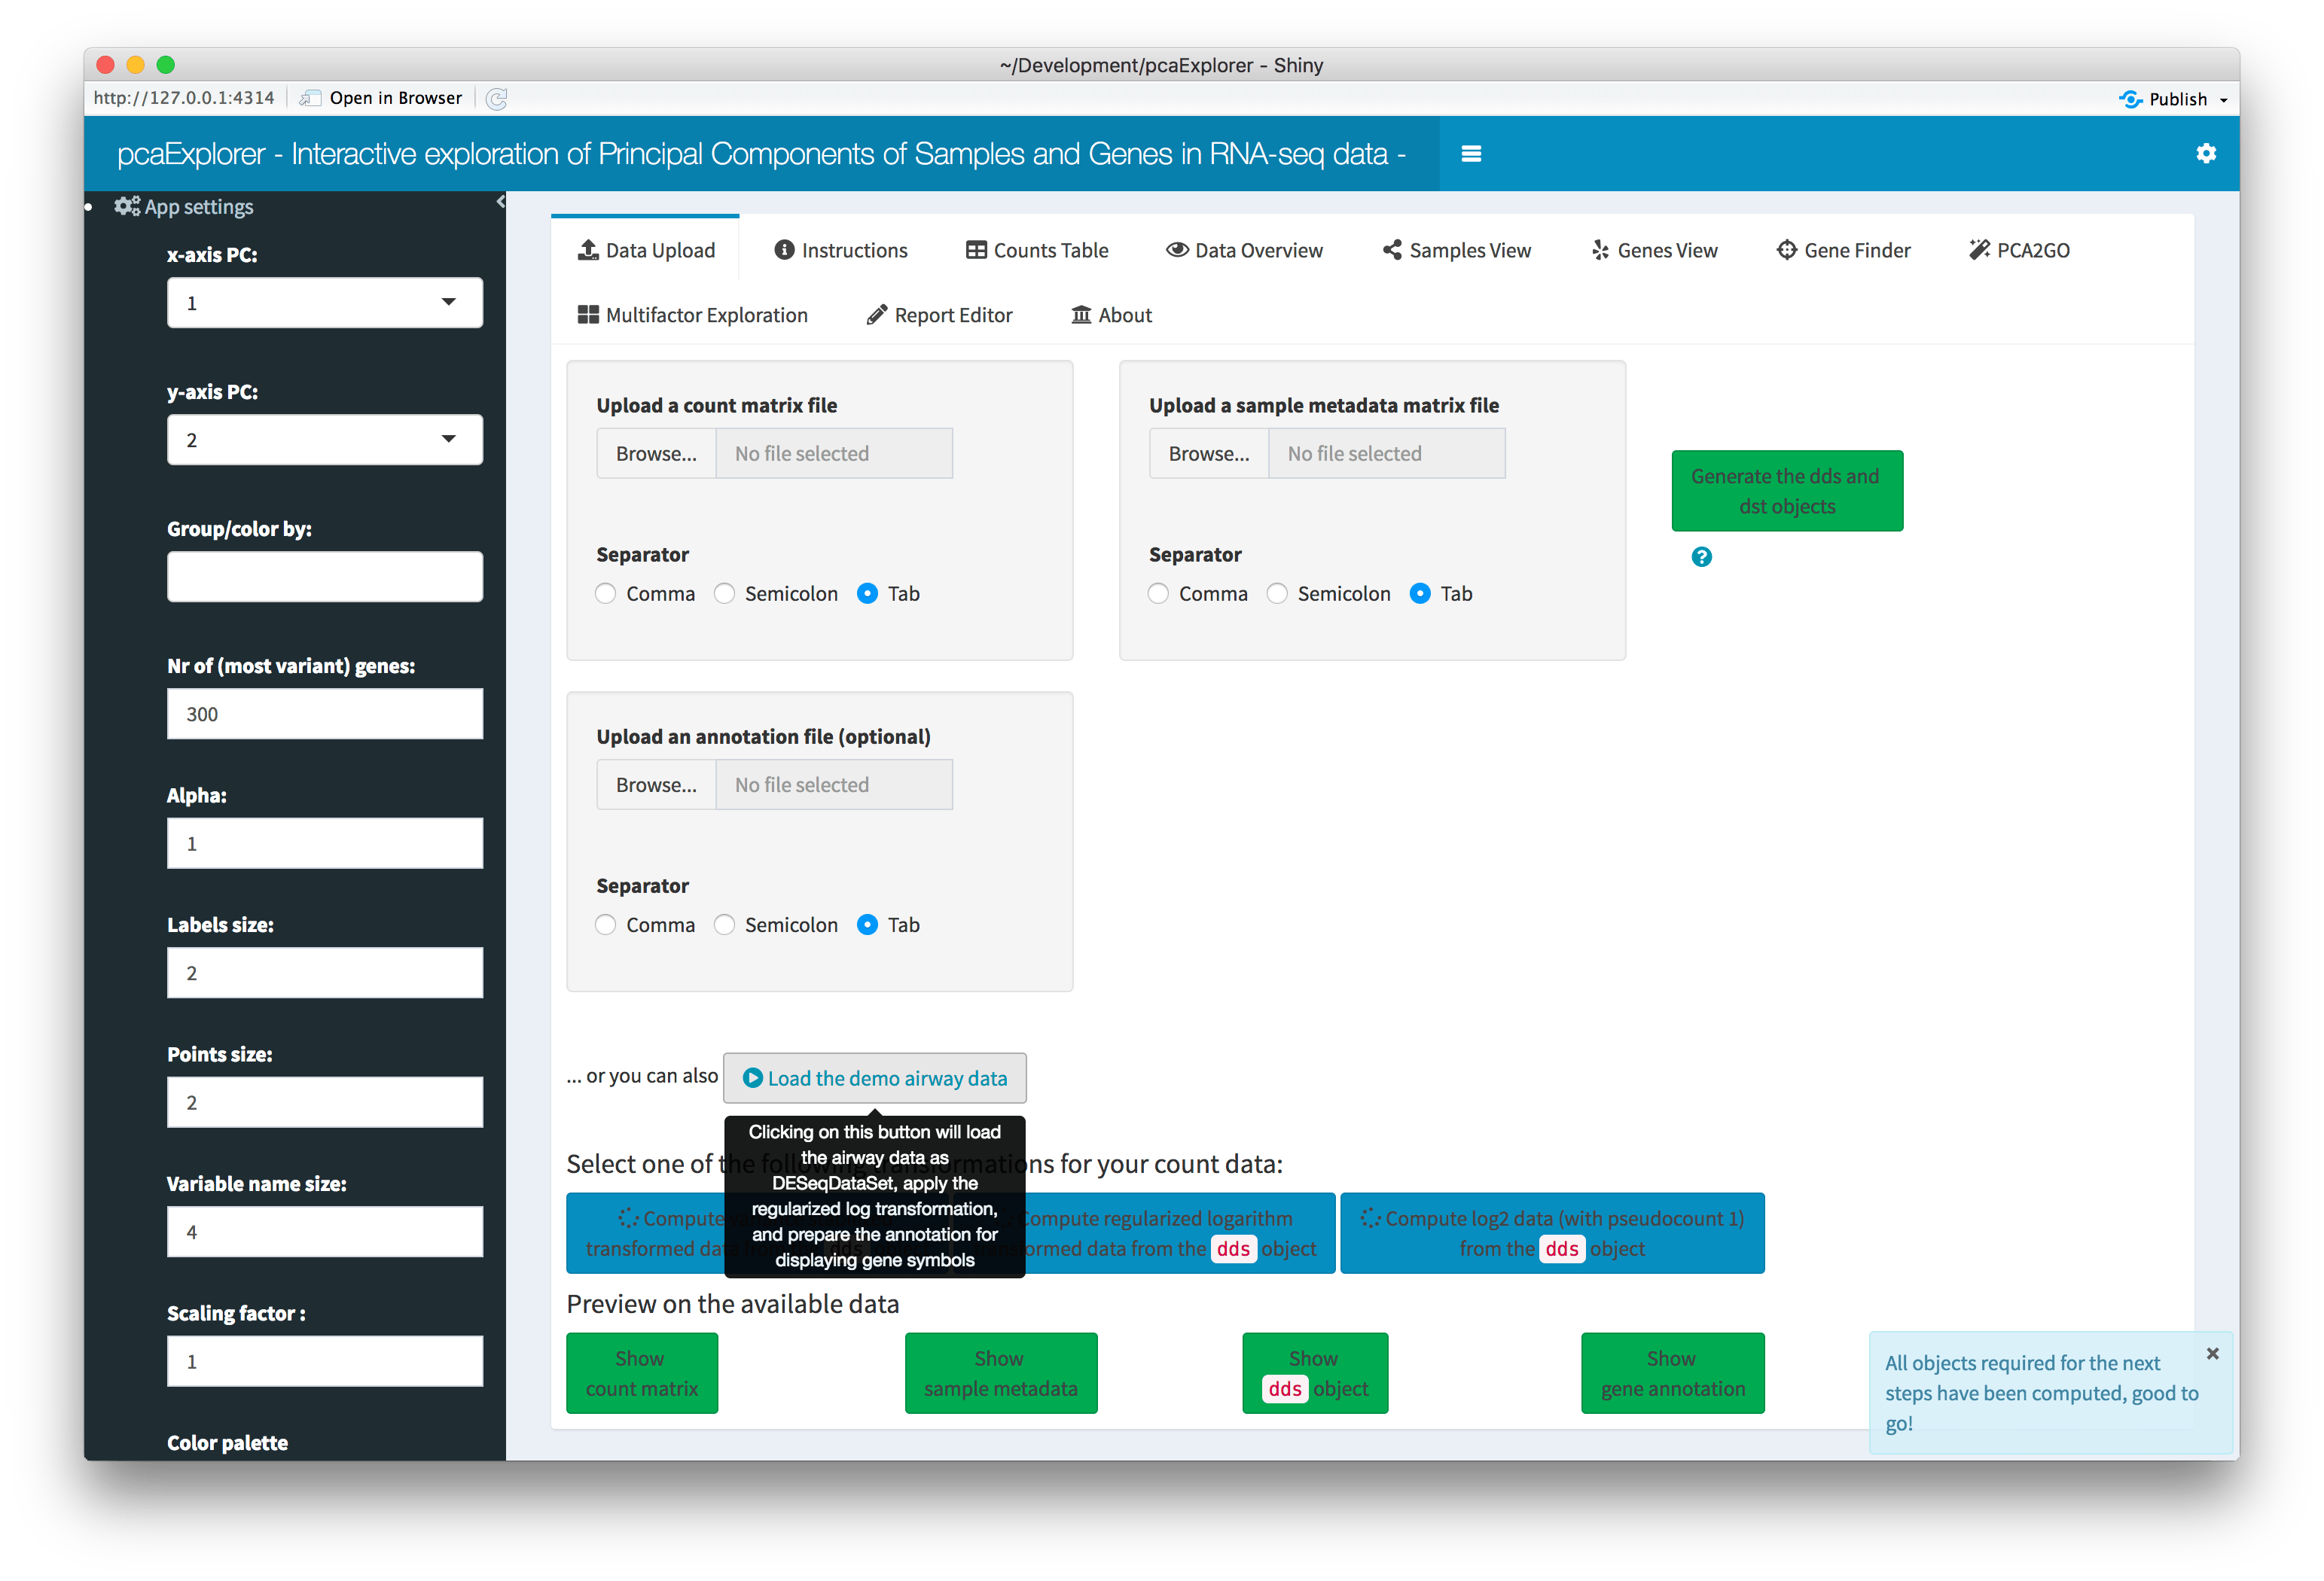 Overview of the Data Upload panel. After clicking on the 'Load the demo airway data' button, all widgets are automatically populated, and each data component (count matrix, experimental data, dds object, annotation) can be previewed in a modal window by clicking on its respective button.